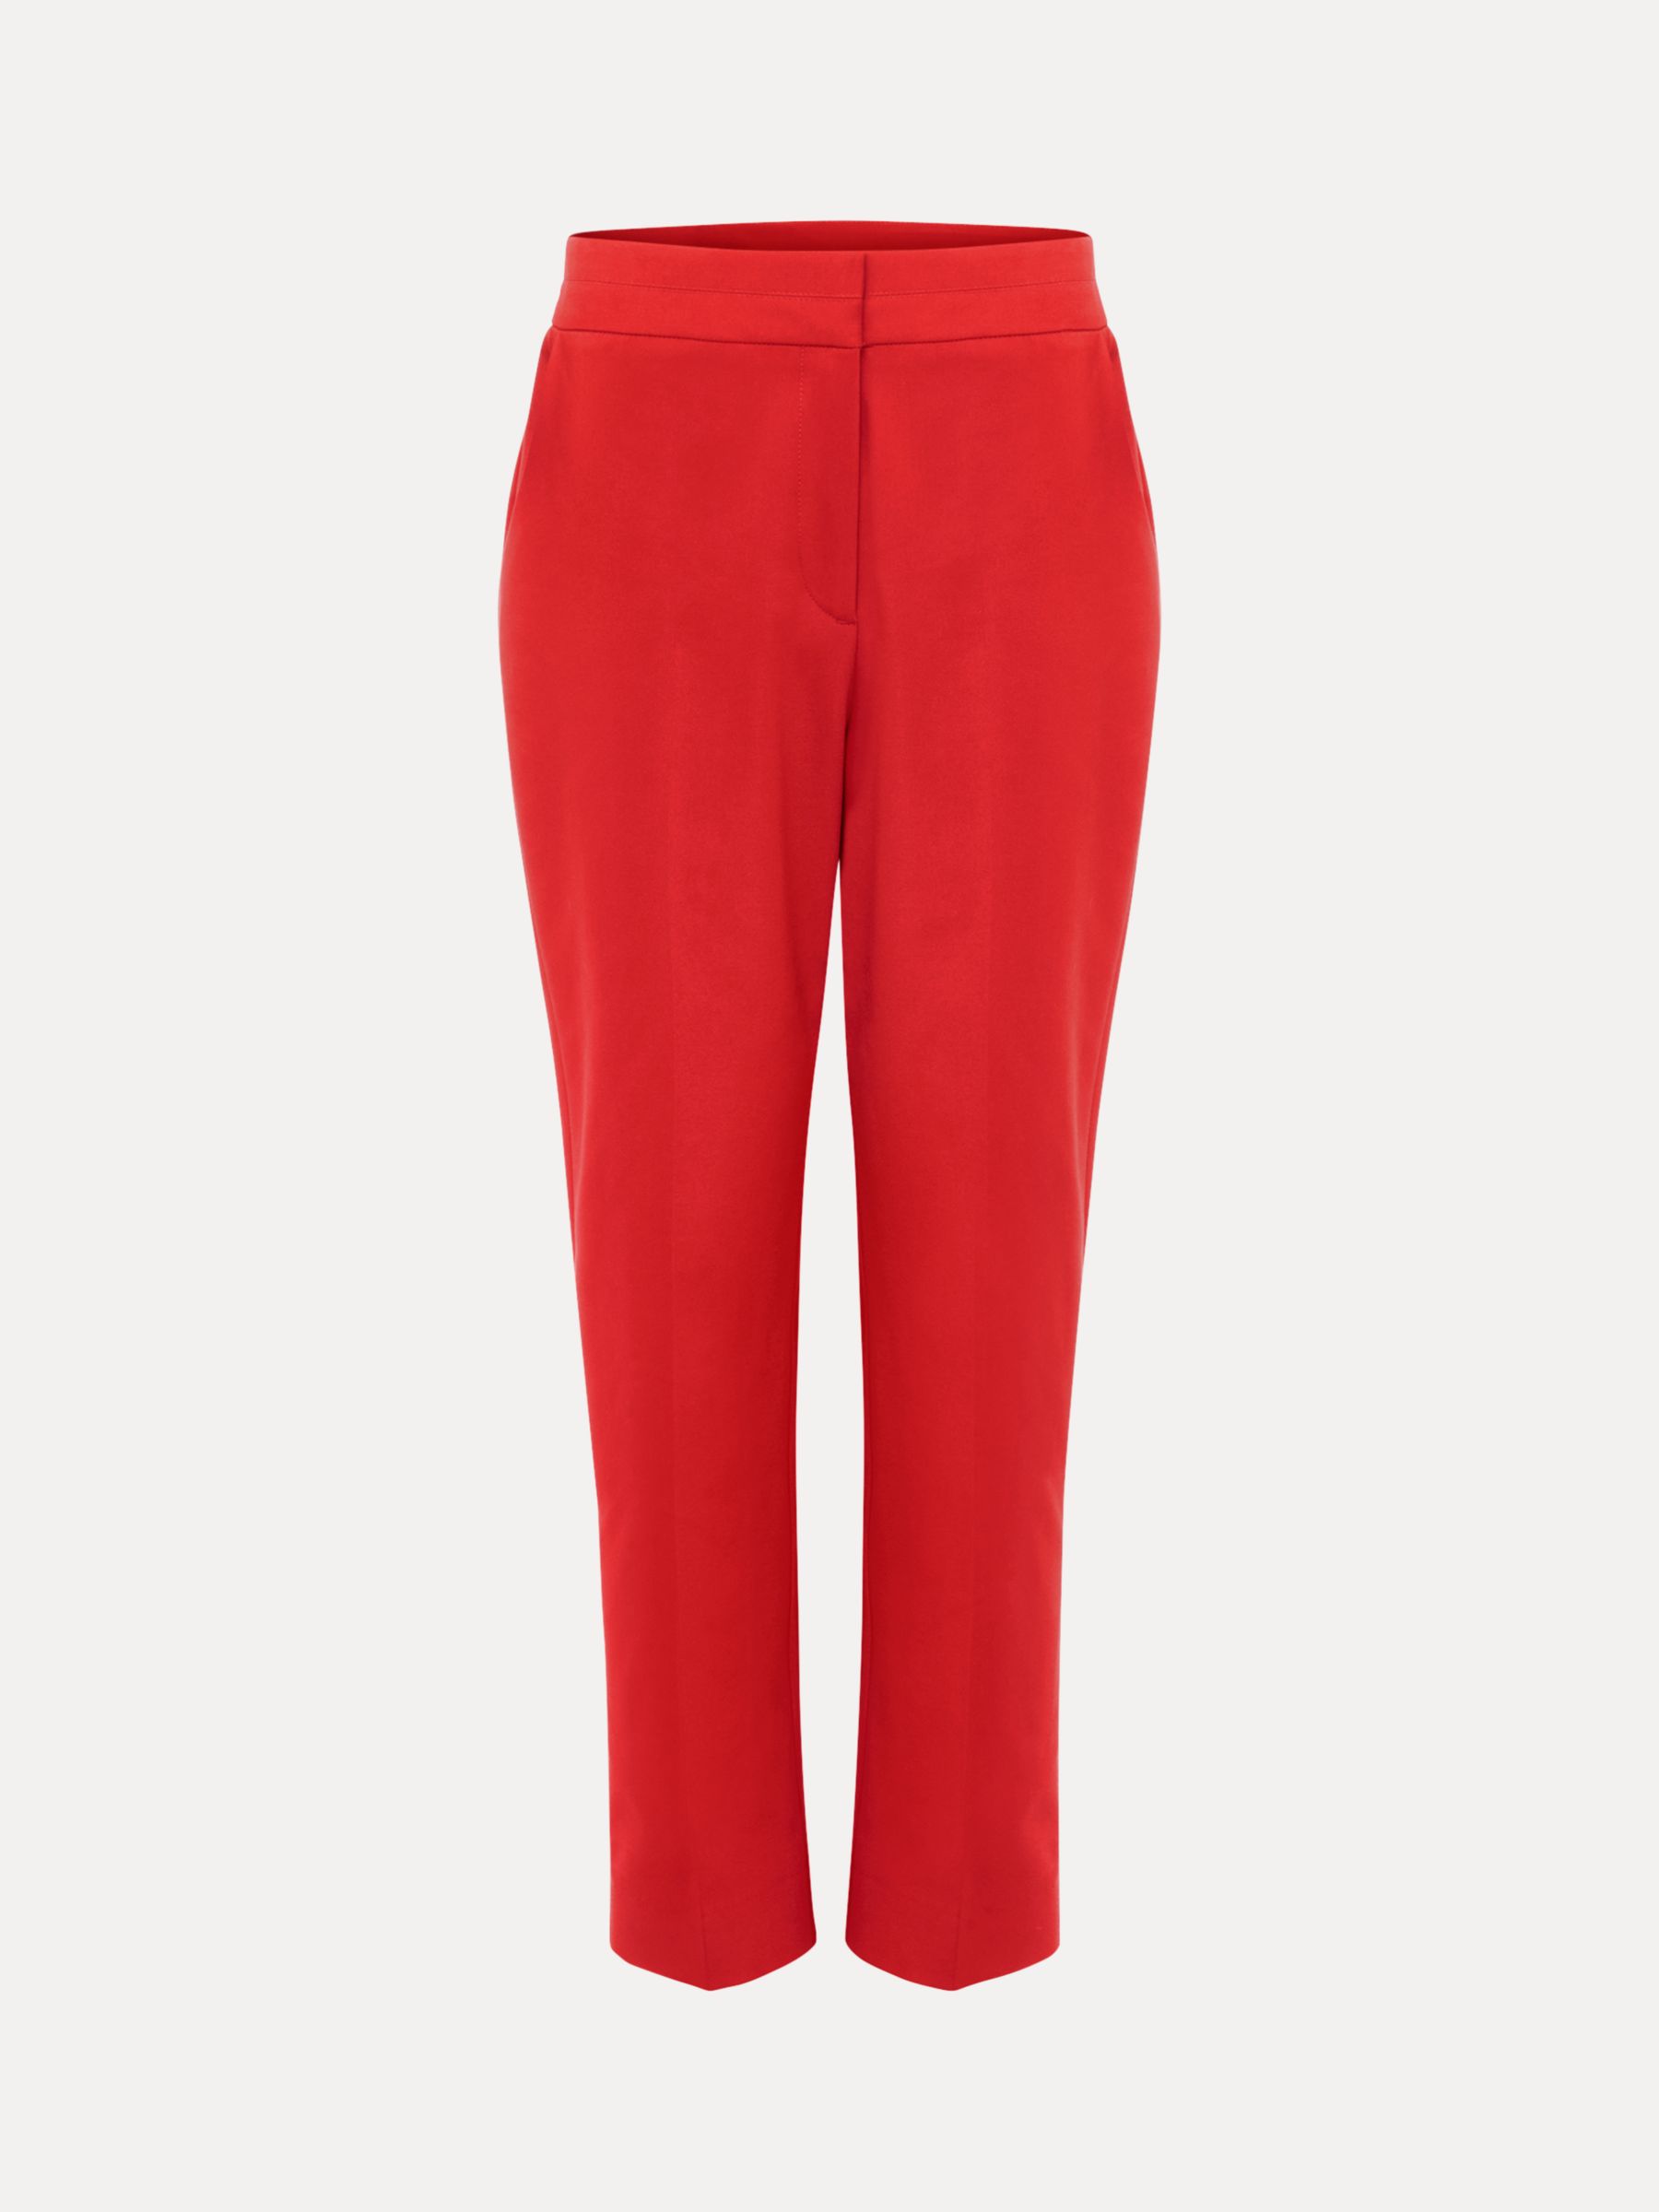 Phase Eight Ulrica Ankle Grazer Trousers, Red at John Lewis & Partners